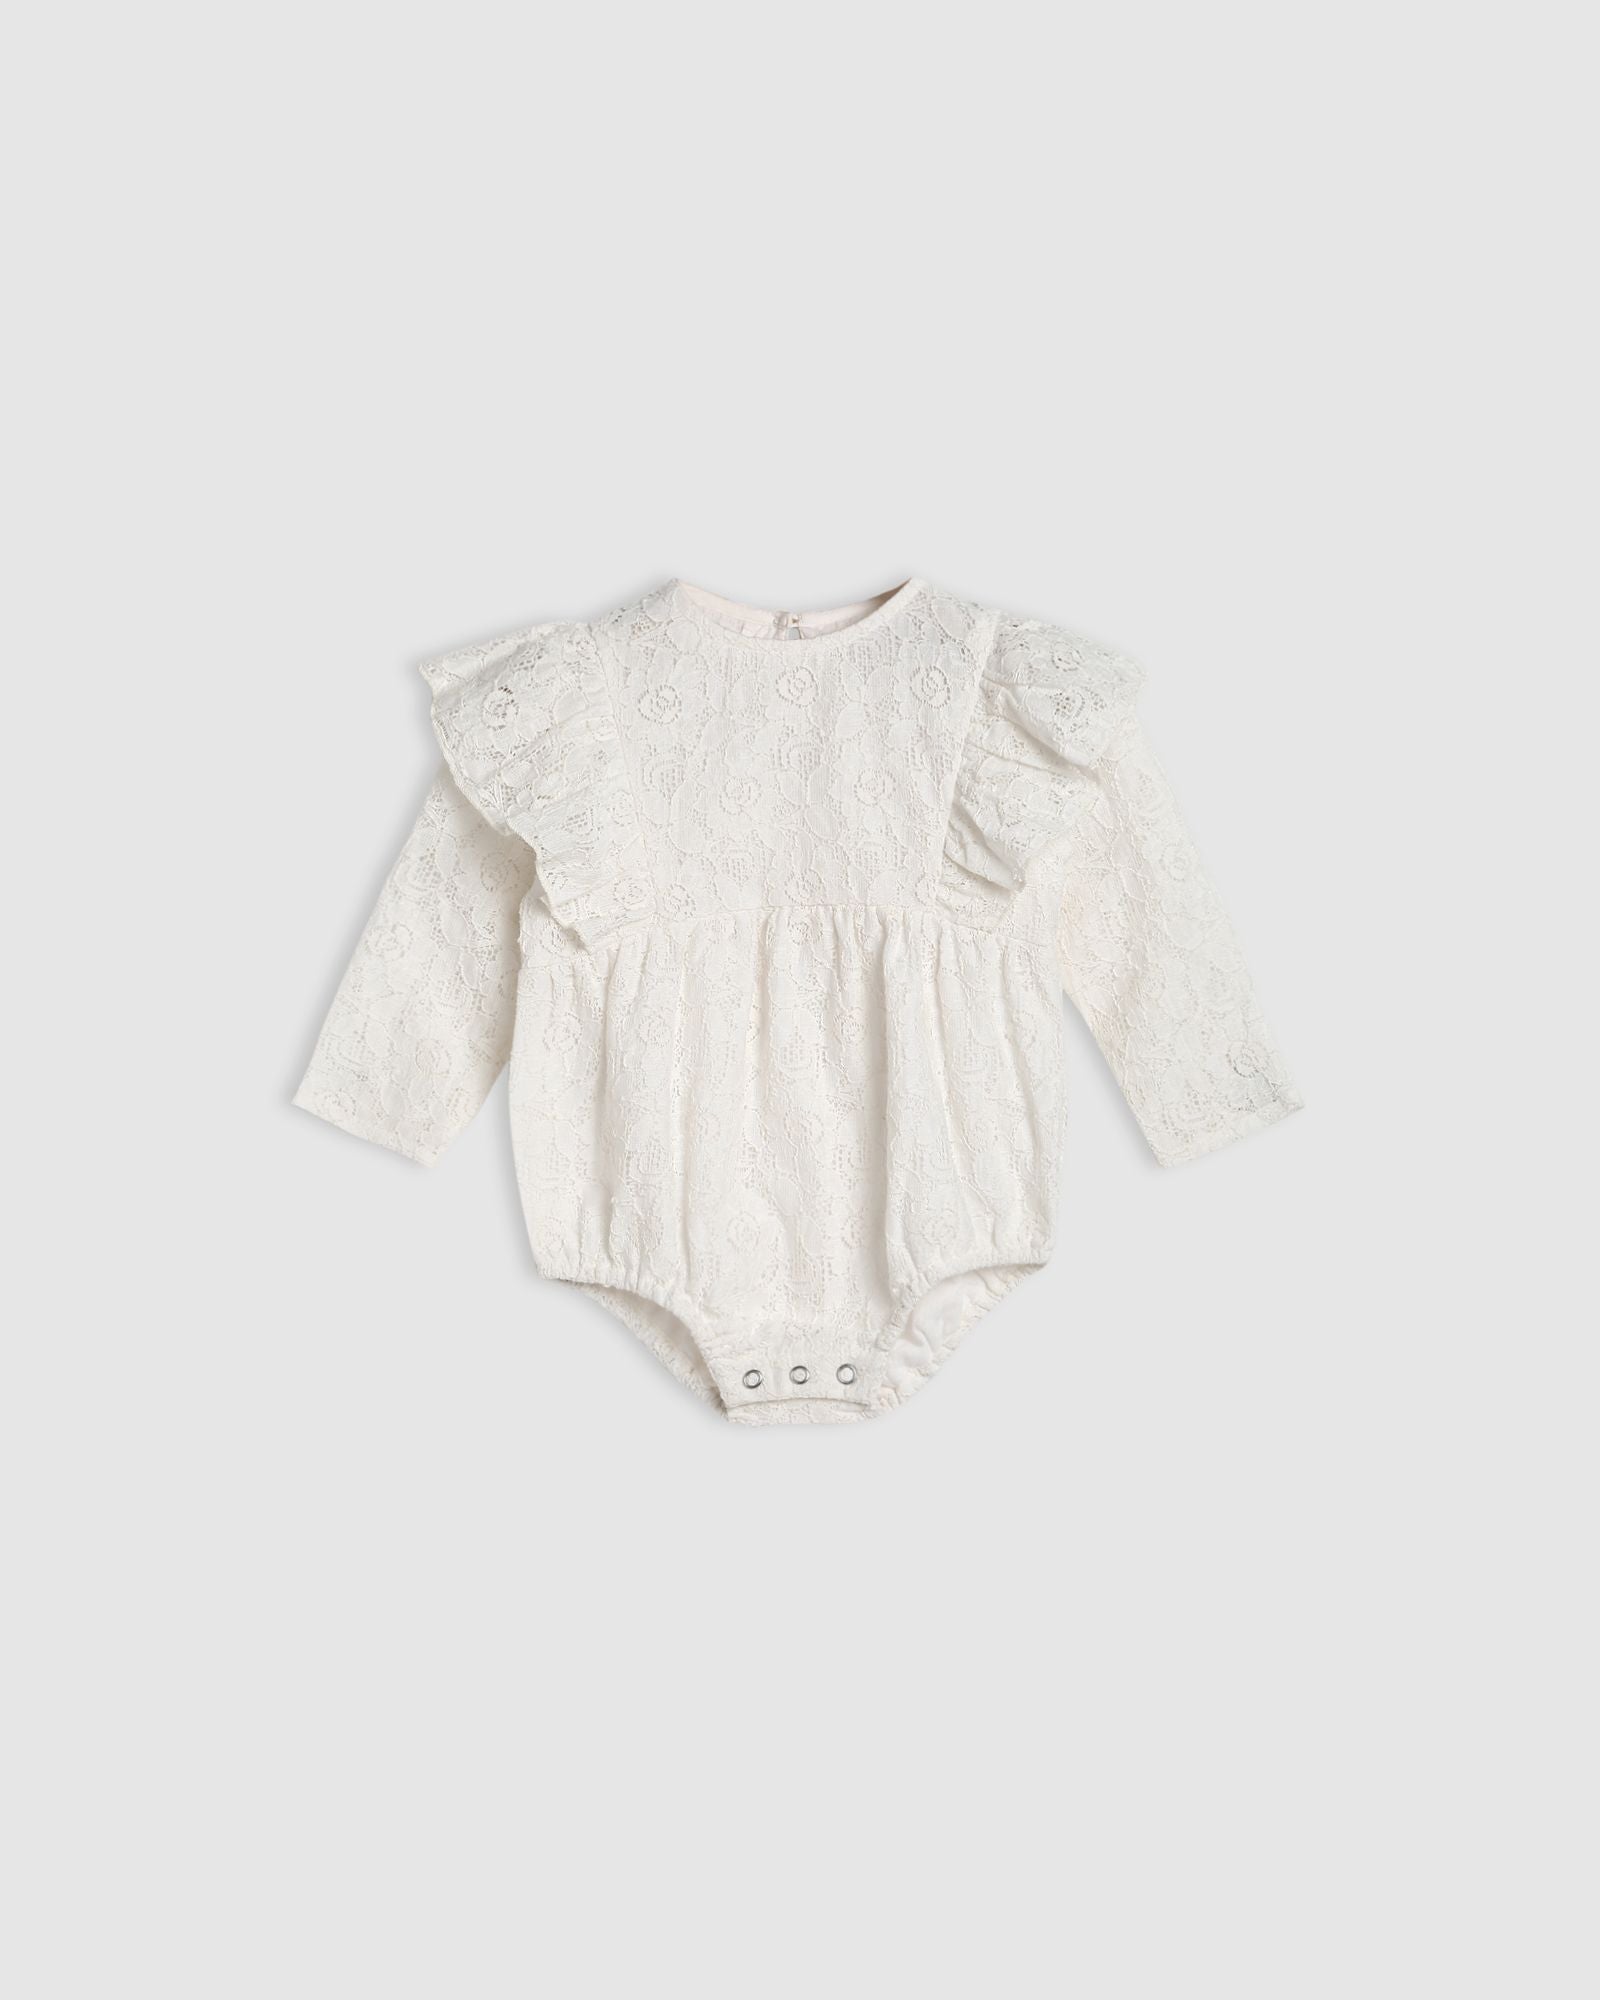 Elenora playsuit - Natural lace